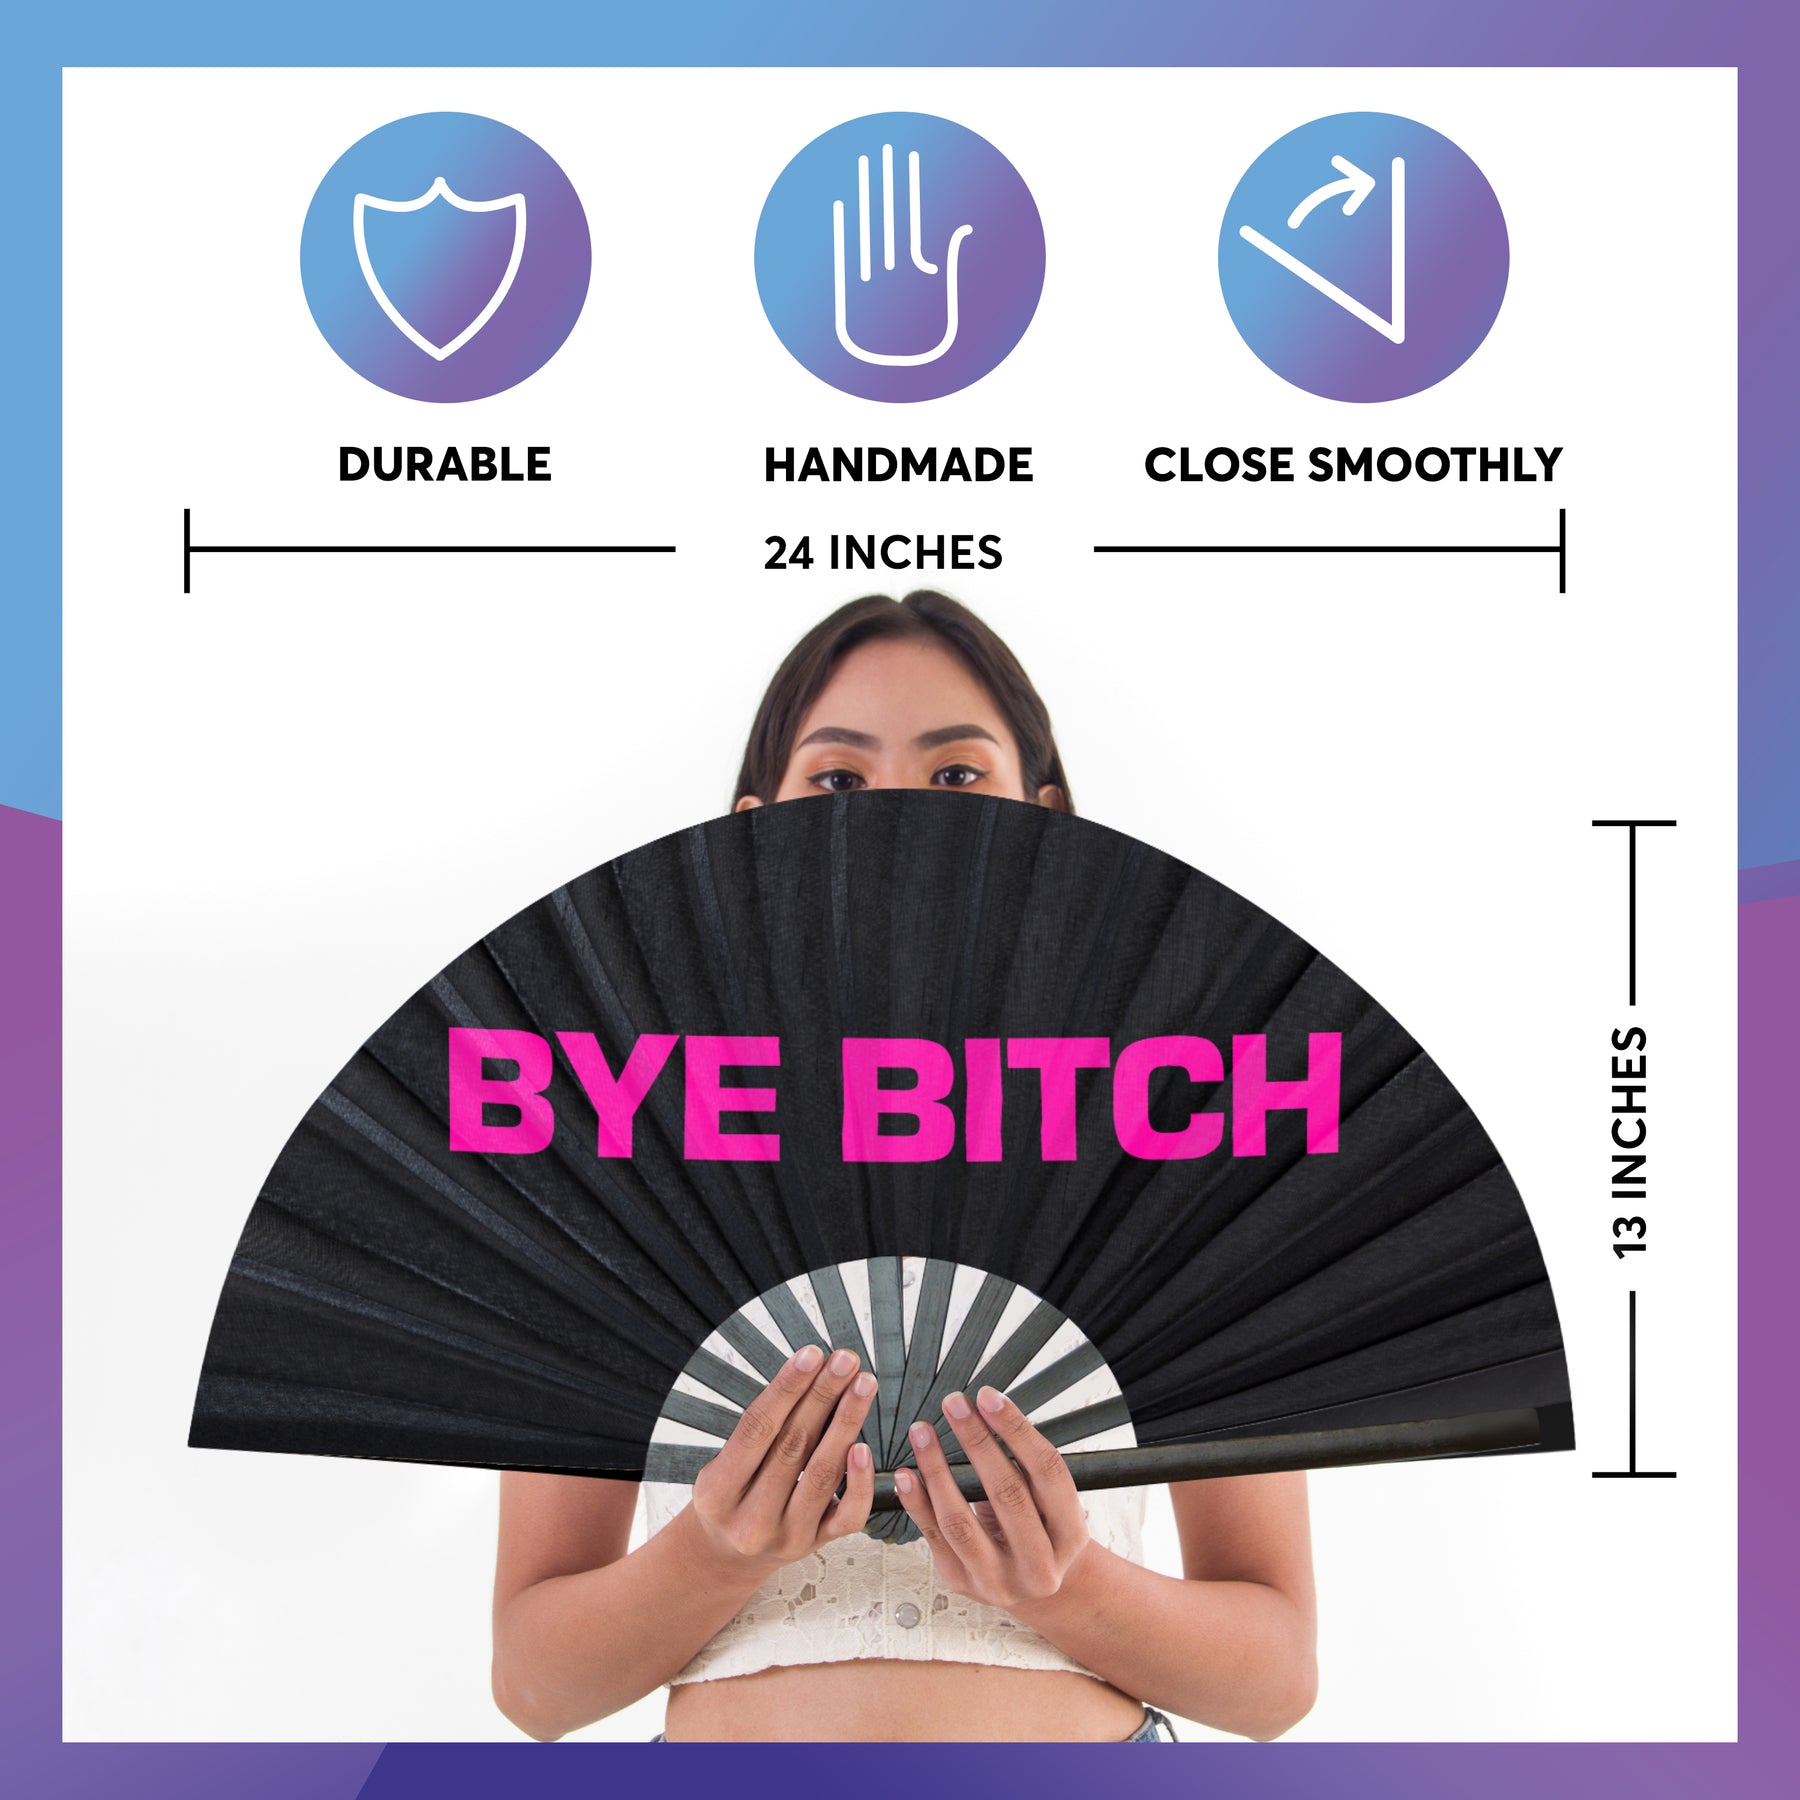 Fanny Pack SoJourner Bags Rave Hand Fan (Bye Bitch) - SoJourner Bags